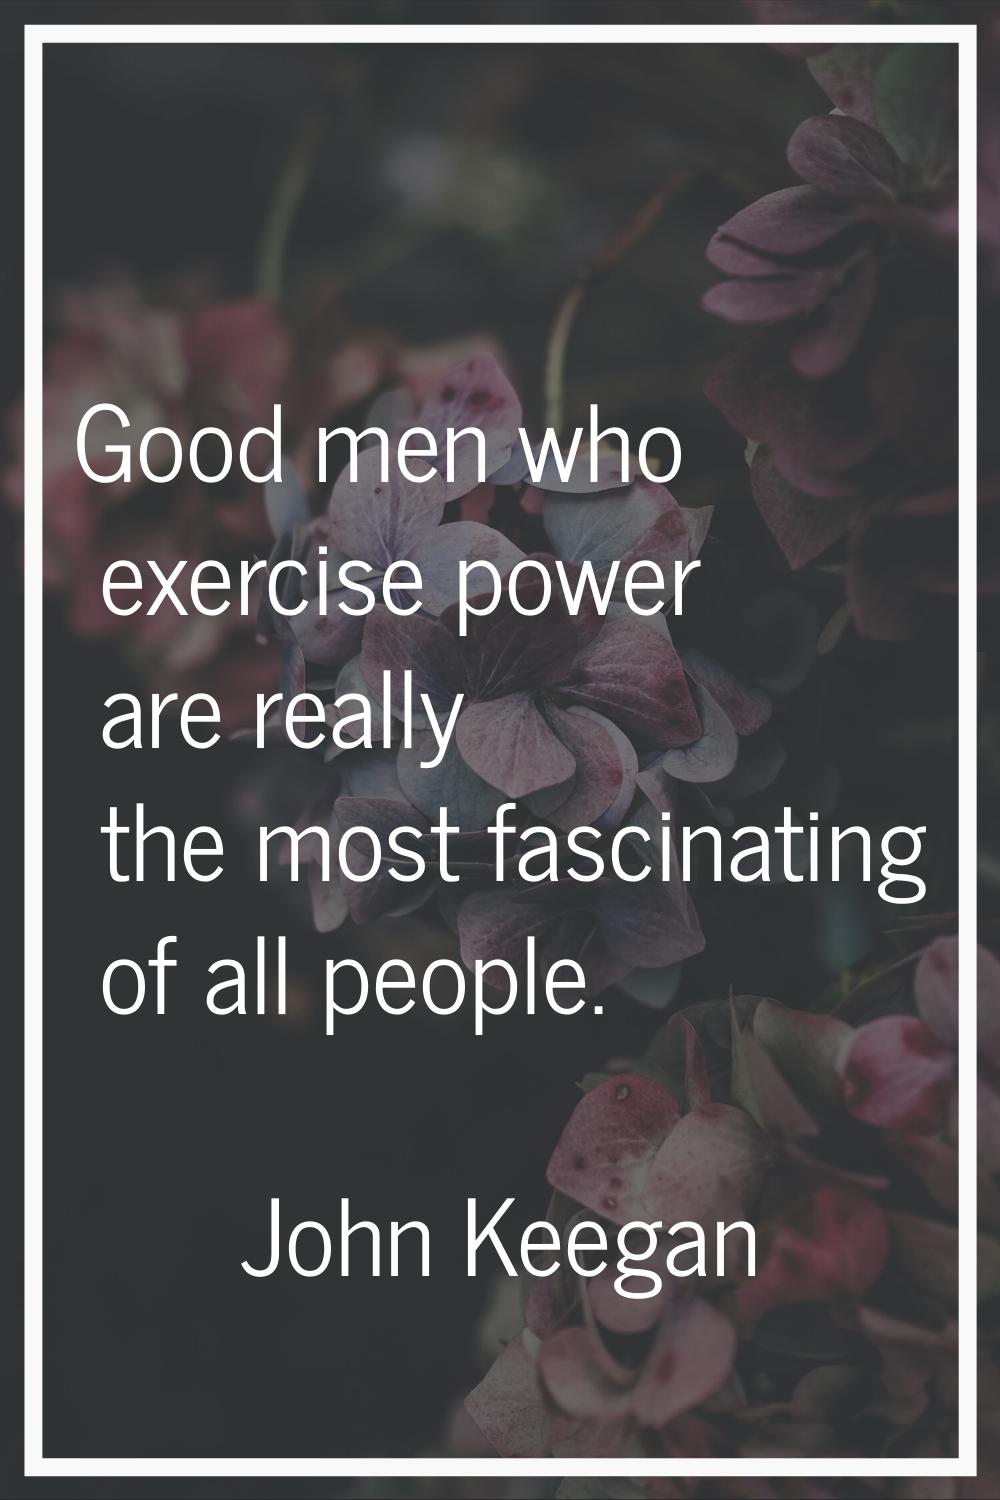 Good men who exercise power are really the most fascinating of all people.